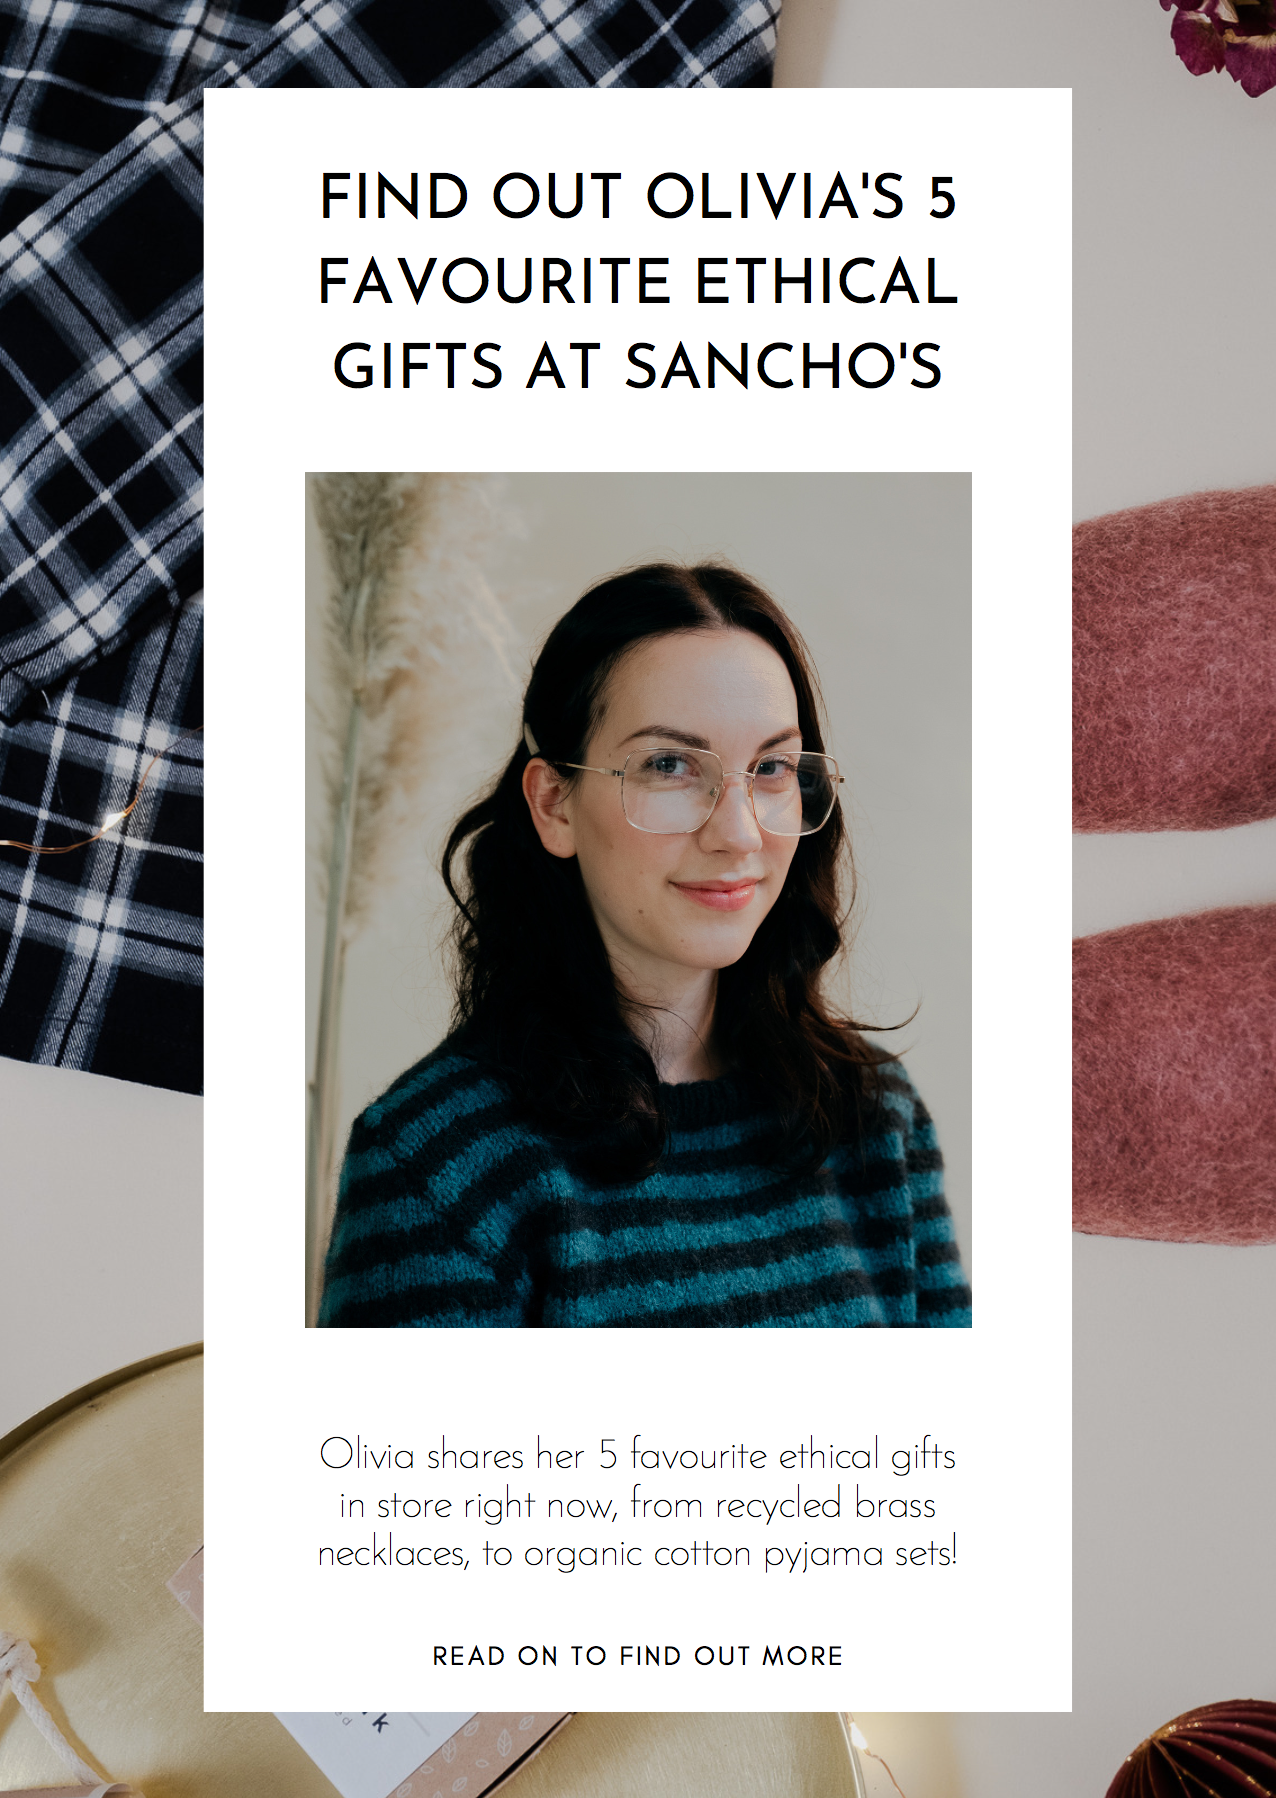 Find Out Olivia's 5 Favourite Ethical Gifts